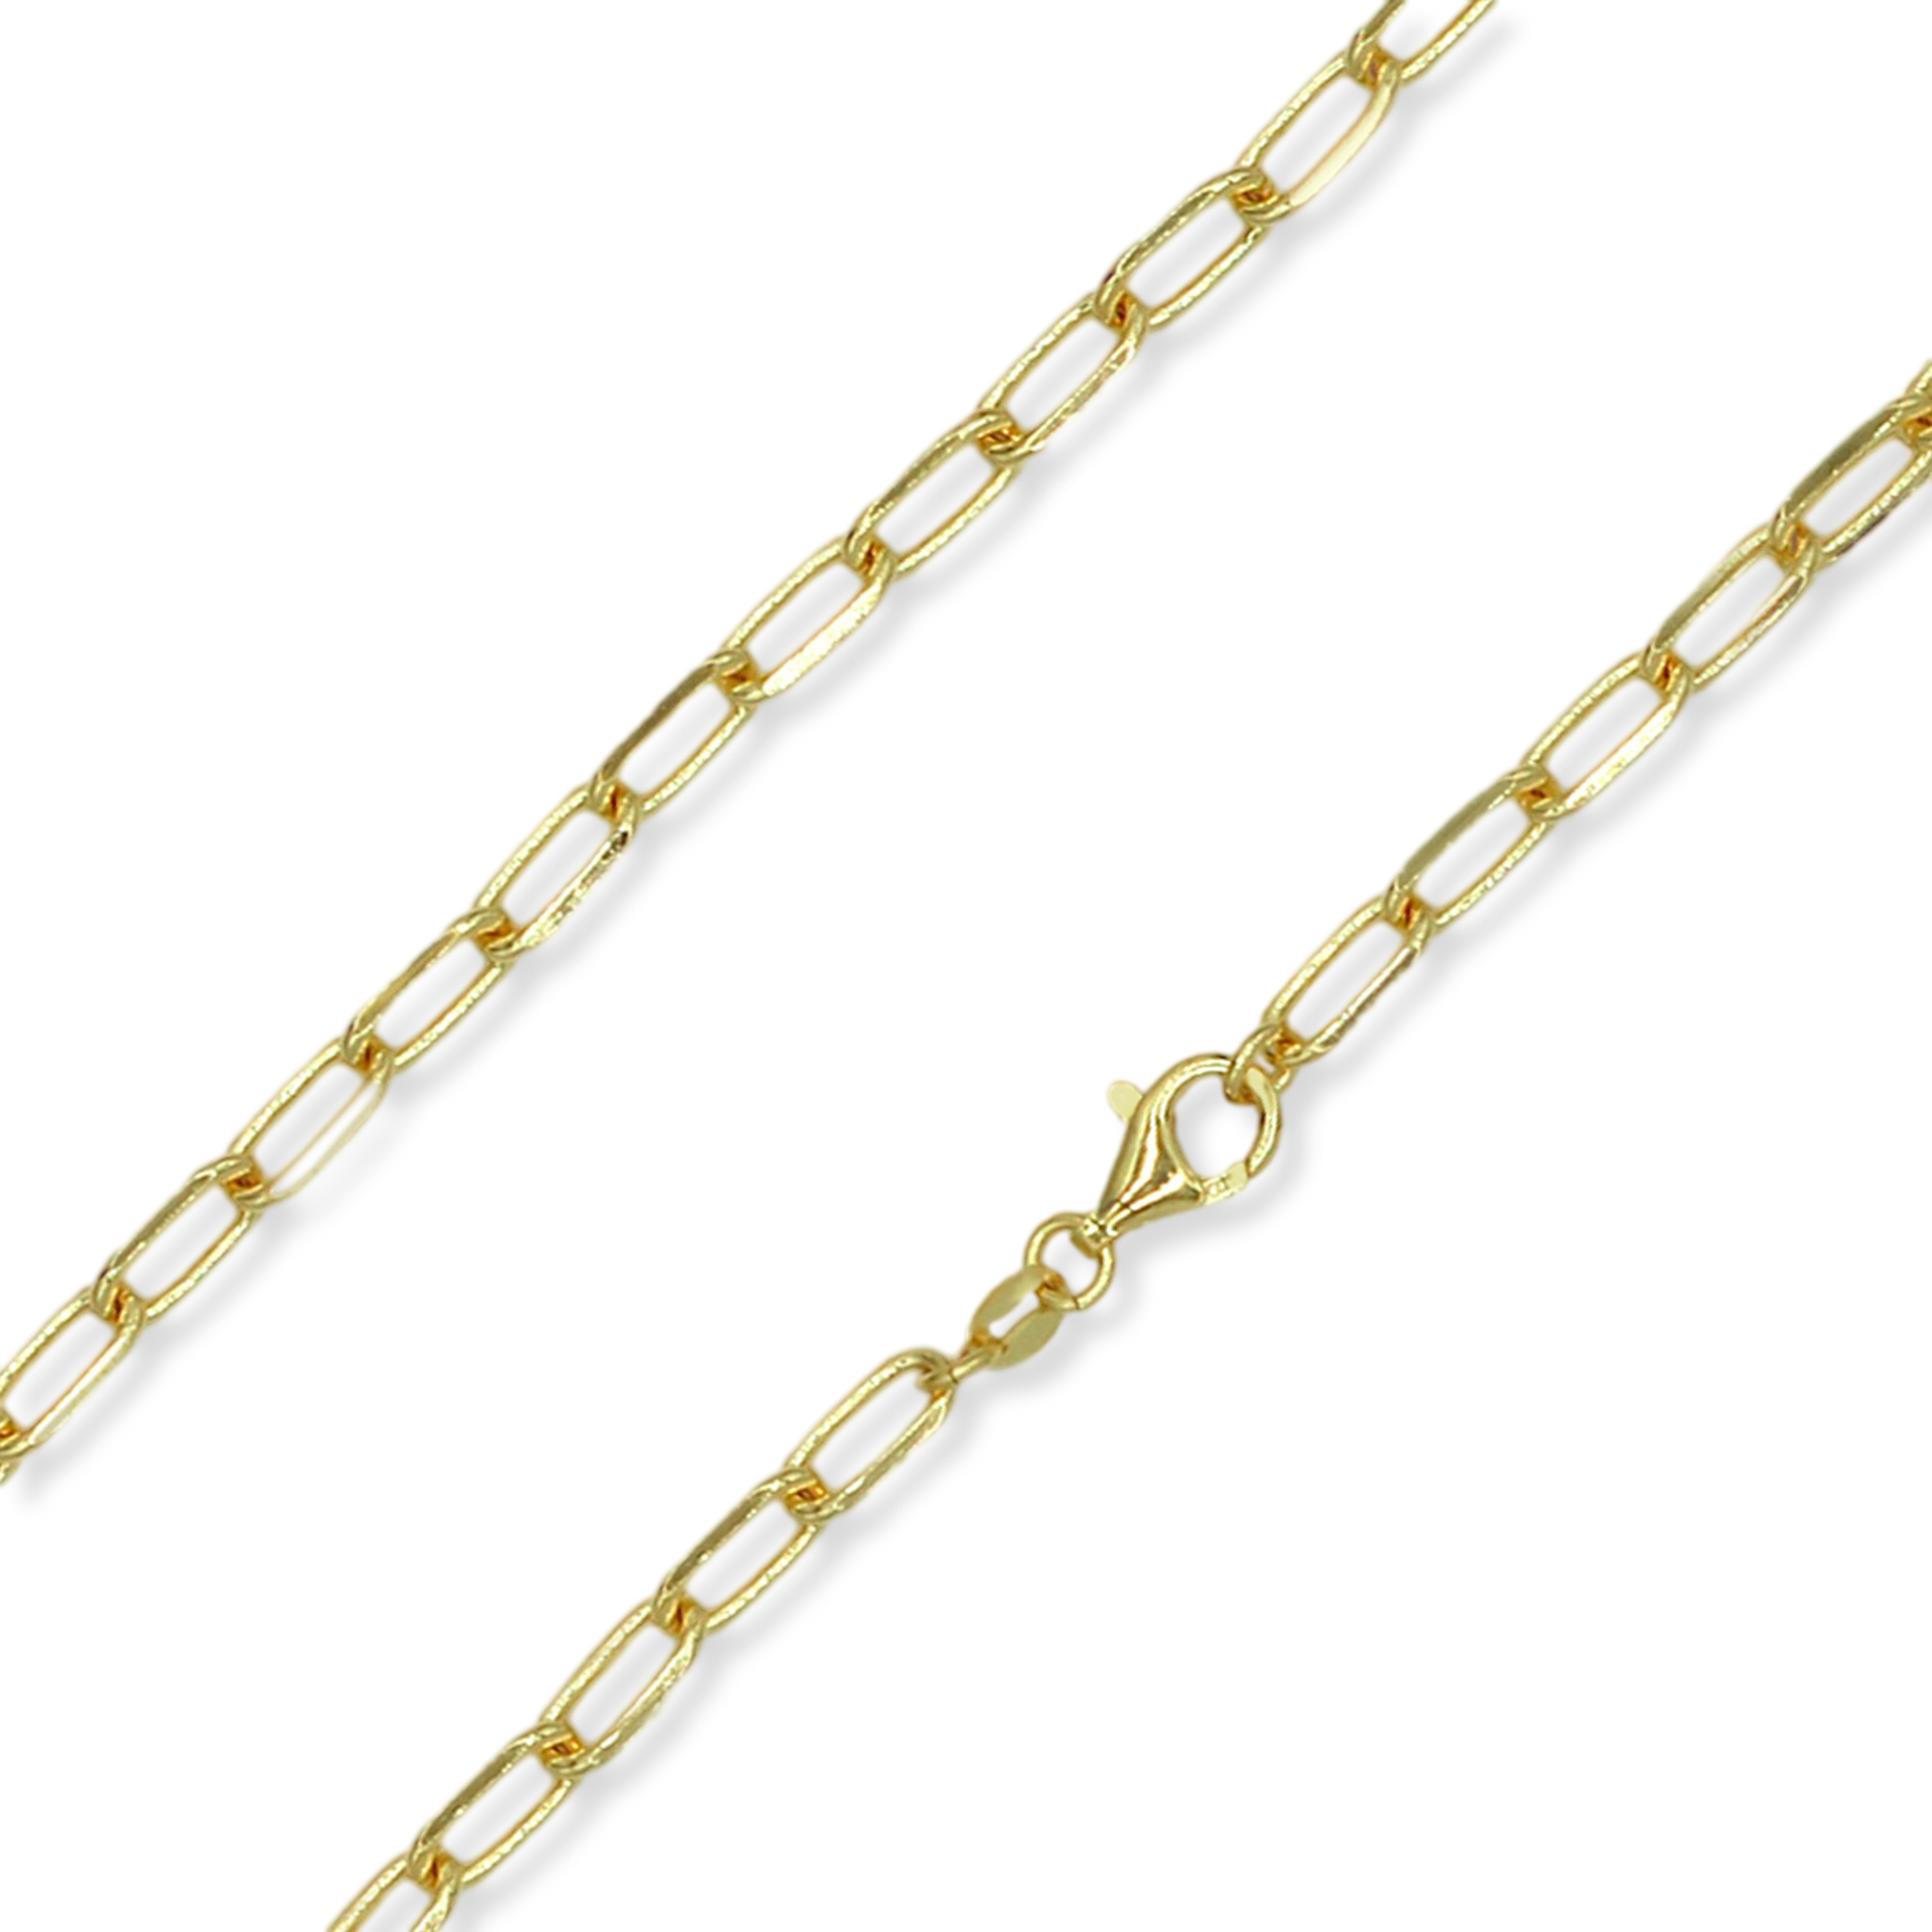 Stellari Gold 18 Karat over Sterling Silver 4.0mm Paperclip Link Chain